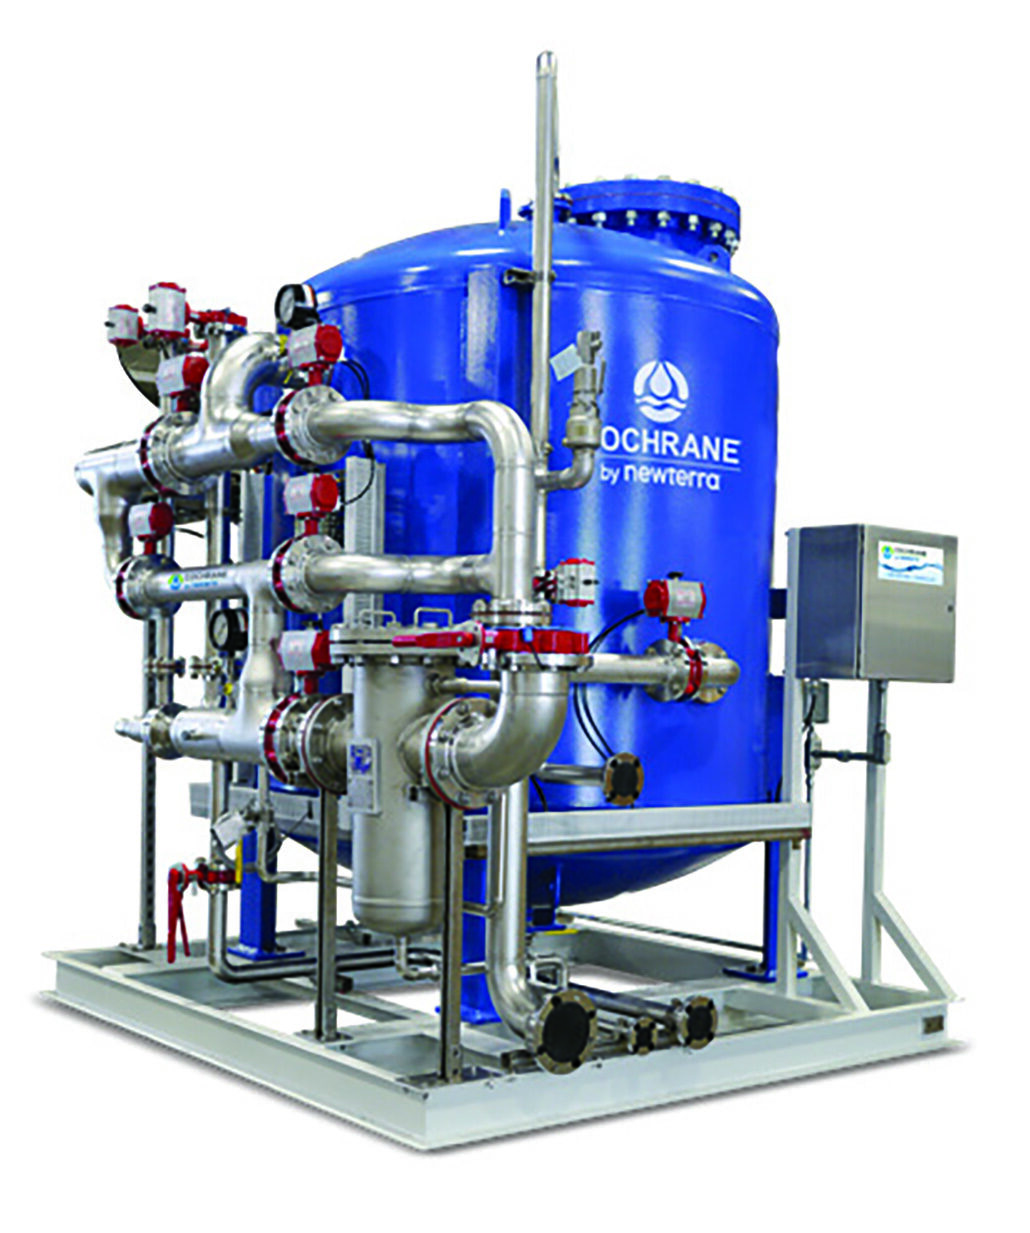 Product image with white background of a Cochrane by Newterra Ion exchange unit consisting of a metal frame supporting a blue elevated vessel connected to pipes of various sizes with gauges, levered valves and an electrical box